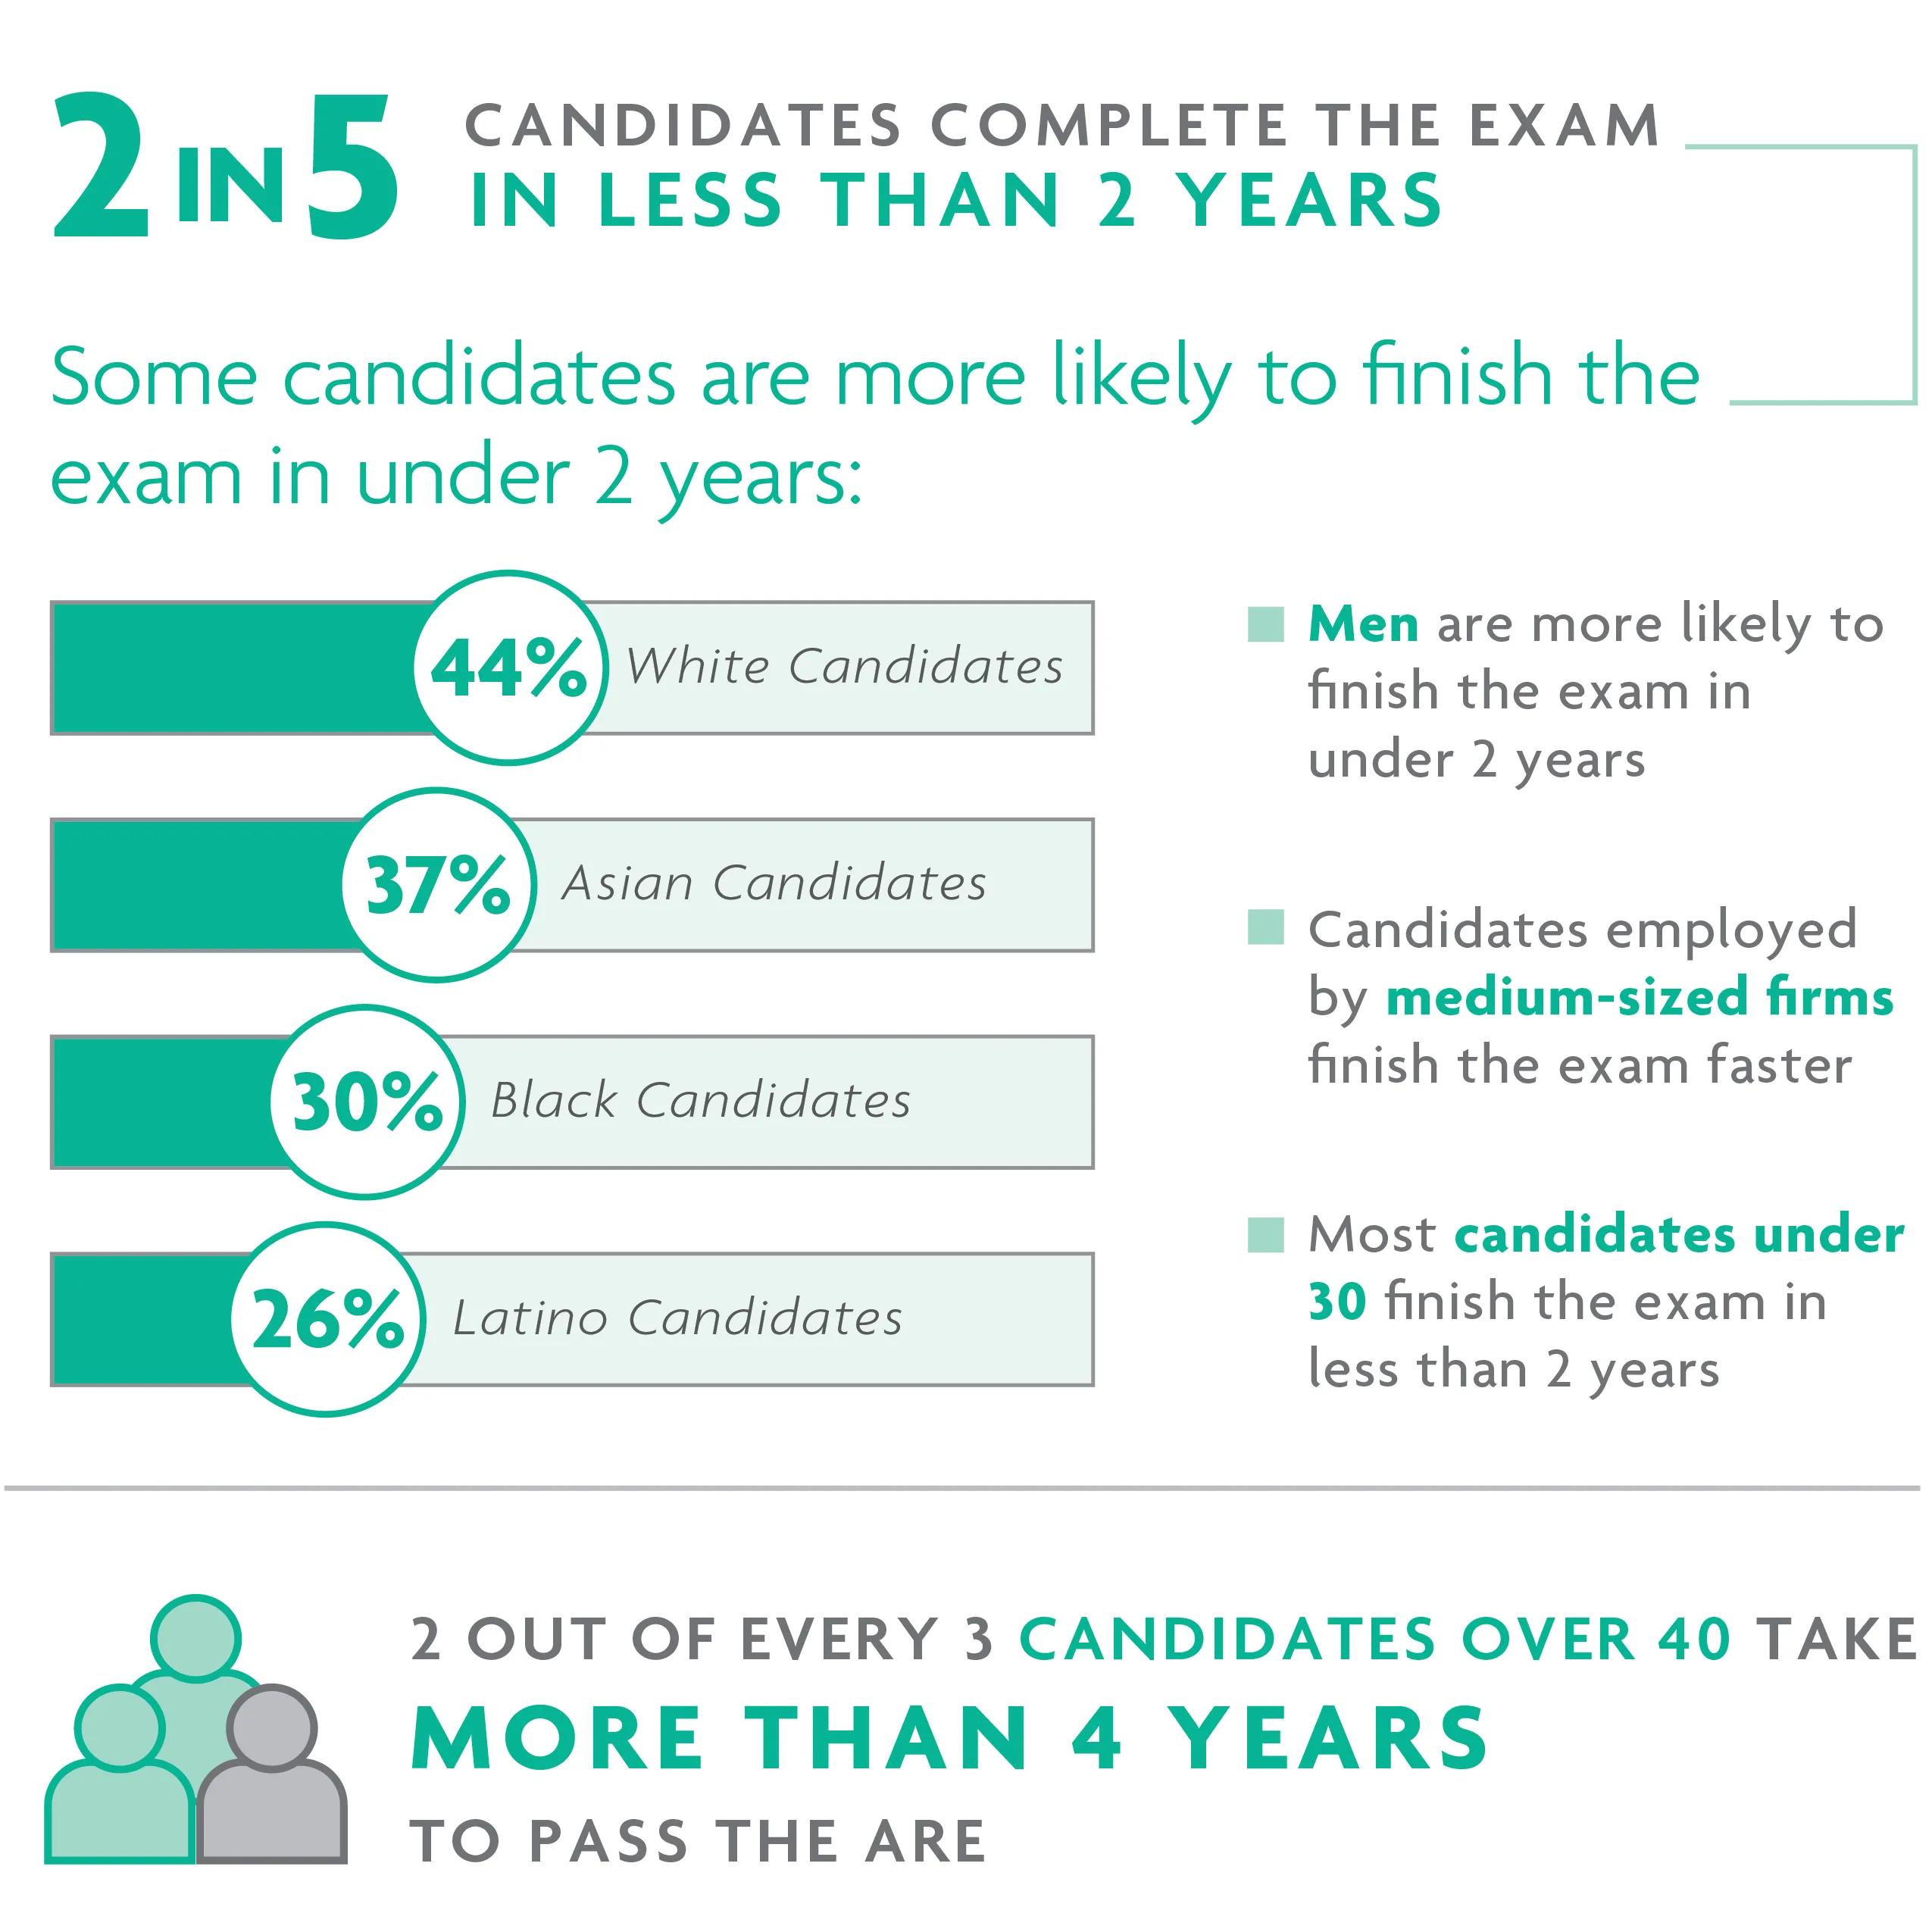 White candidates are more likely than their peers to complete the exam in less than 2 years. For help with data accessibility, contact communications@ncarb.org. 